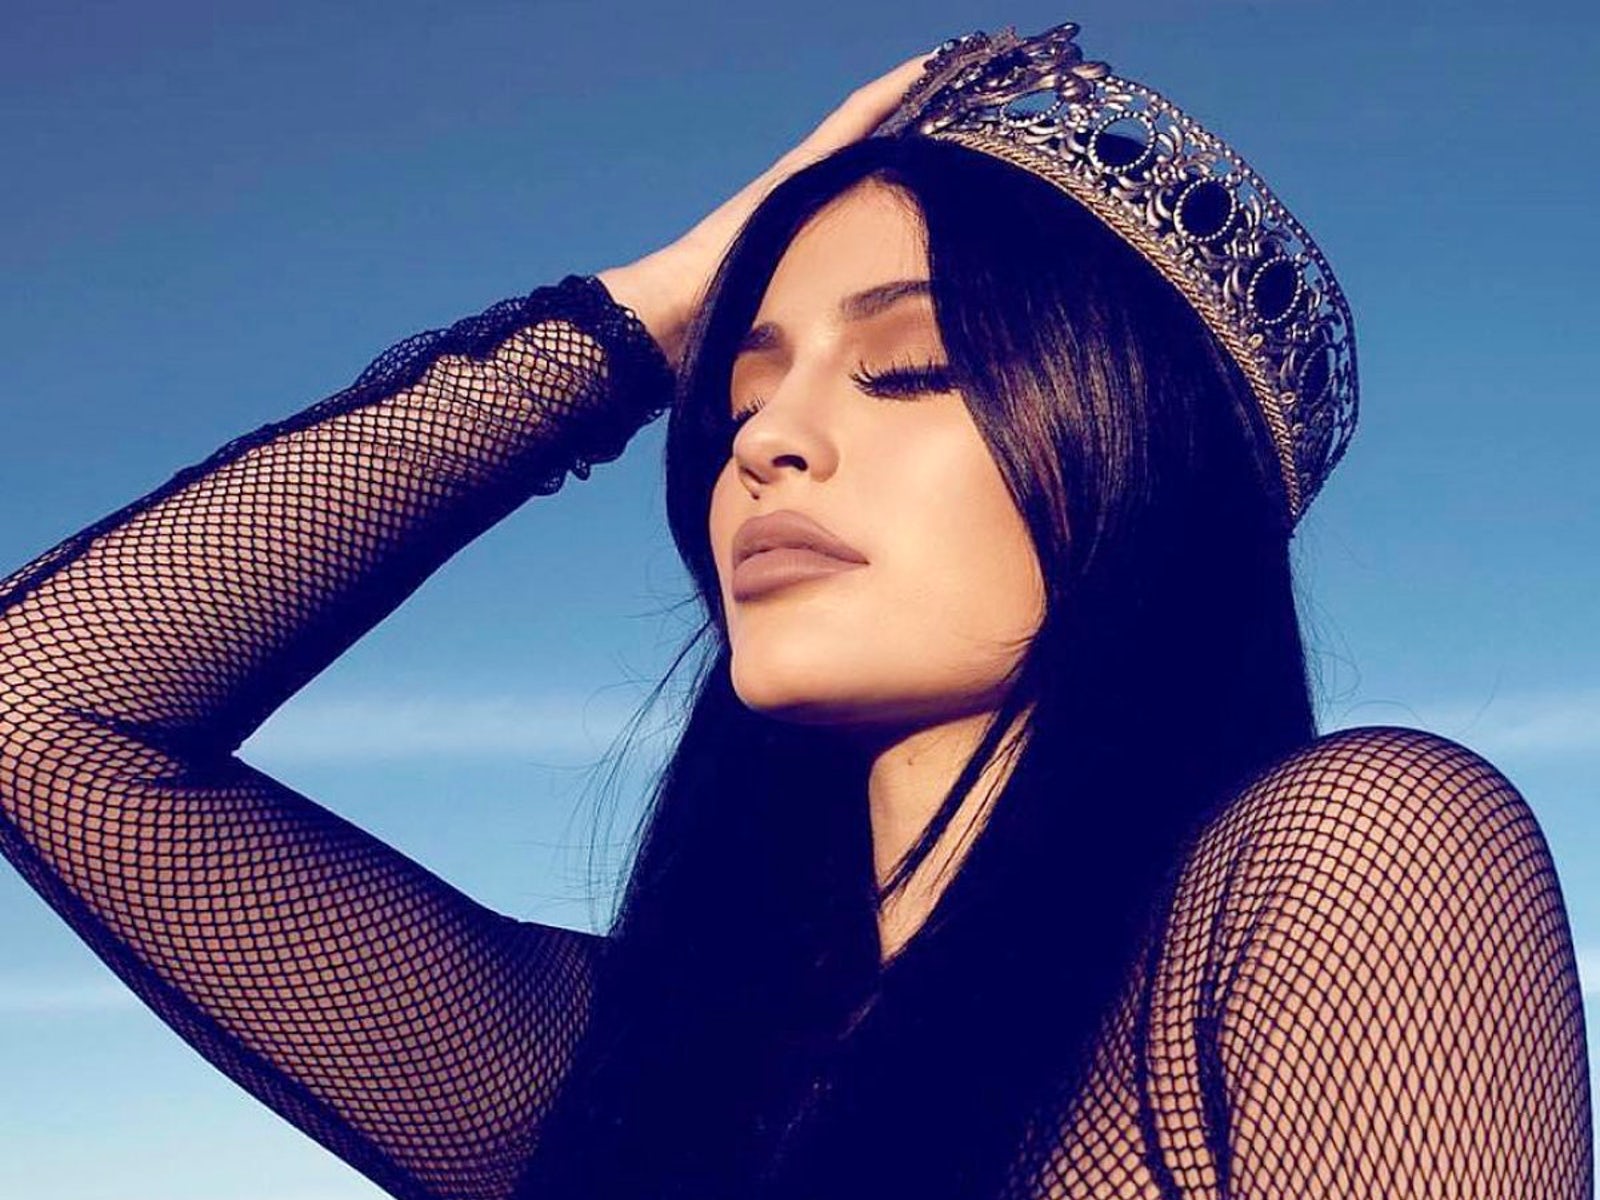 Kylie Jenner Reportedly Getting Her Own Keeping Up With The